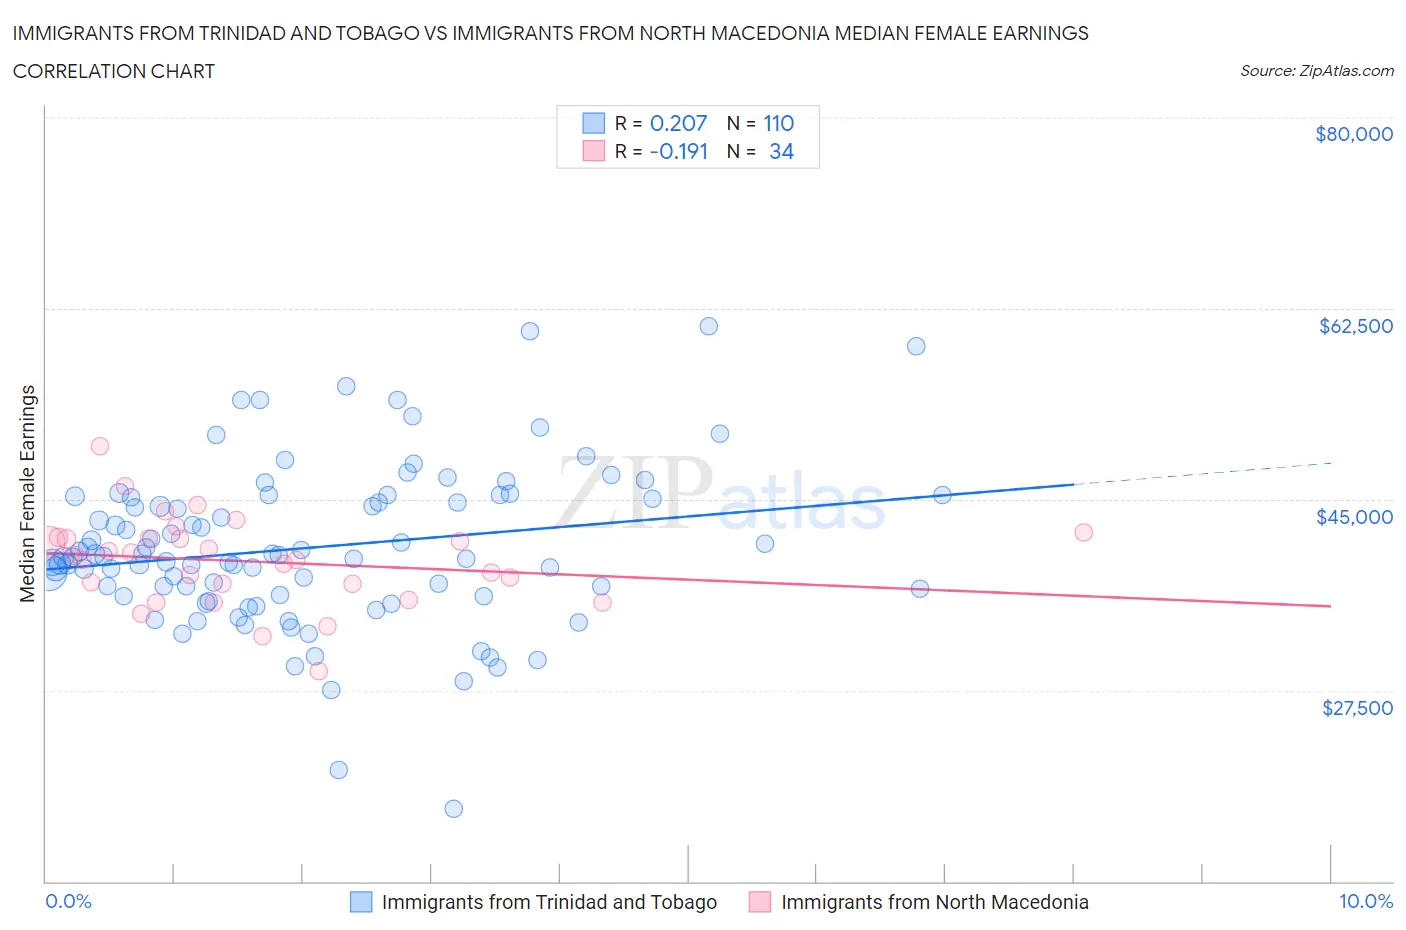 Immigrants from Trinidad and Tobago vs Immigrants from North Macedonia Median Female Earnings